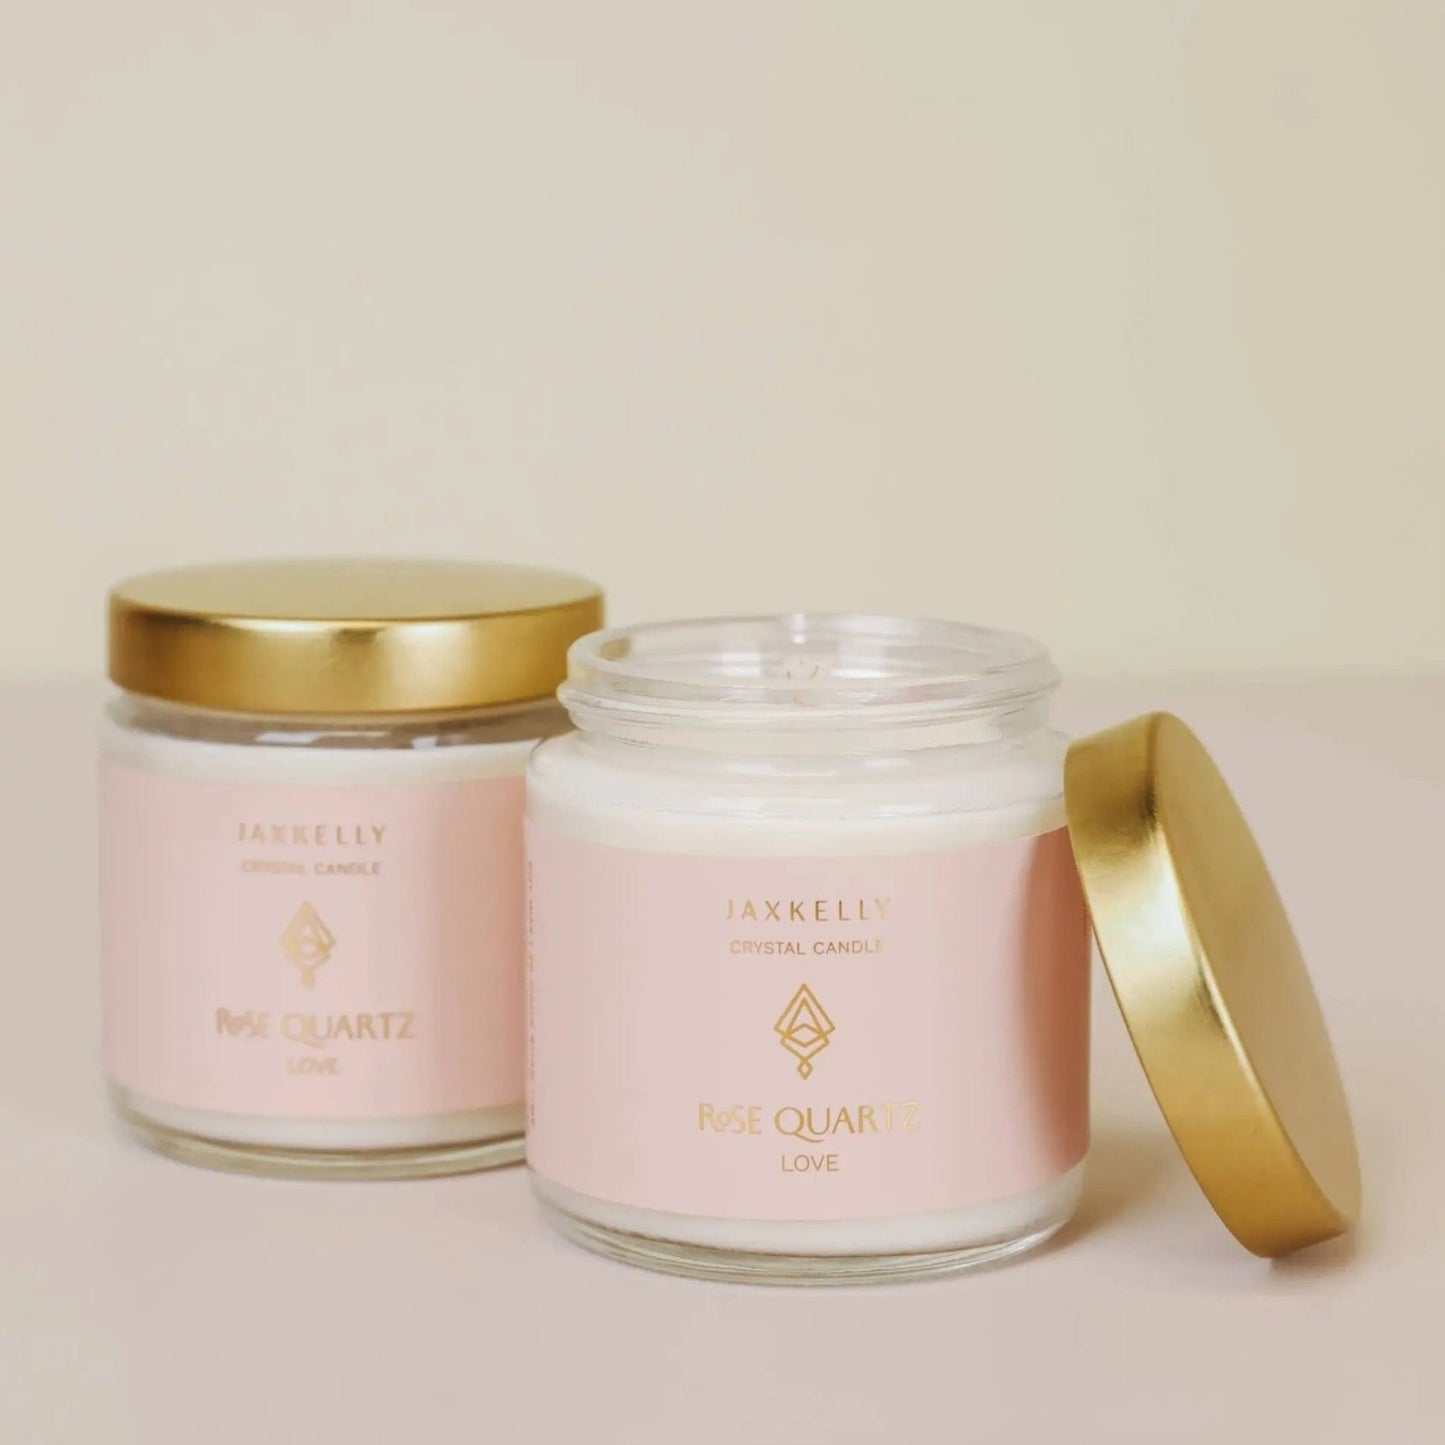 two vanilla candle jars with pink quartz inside with gold lids